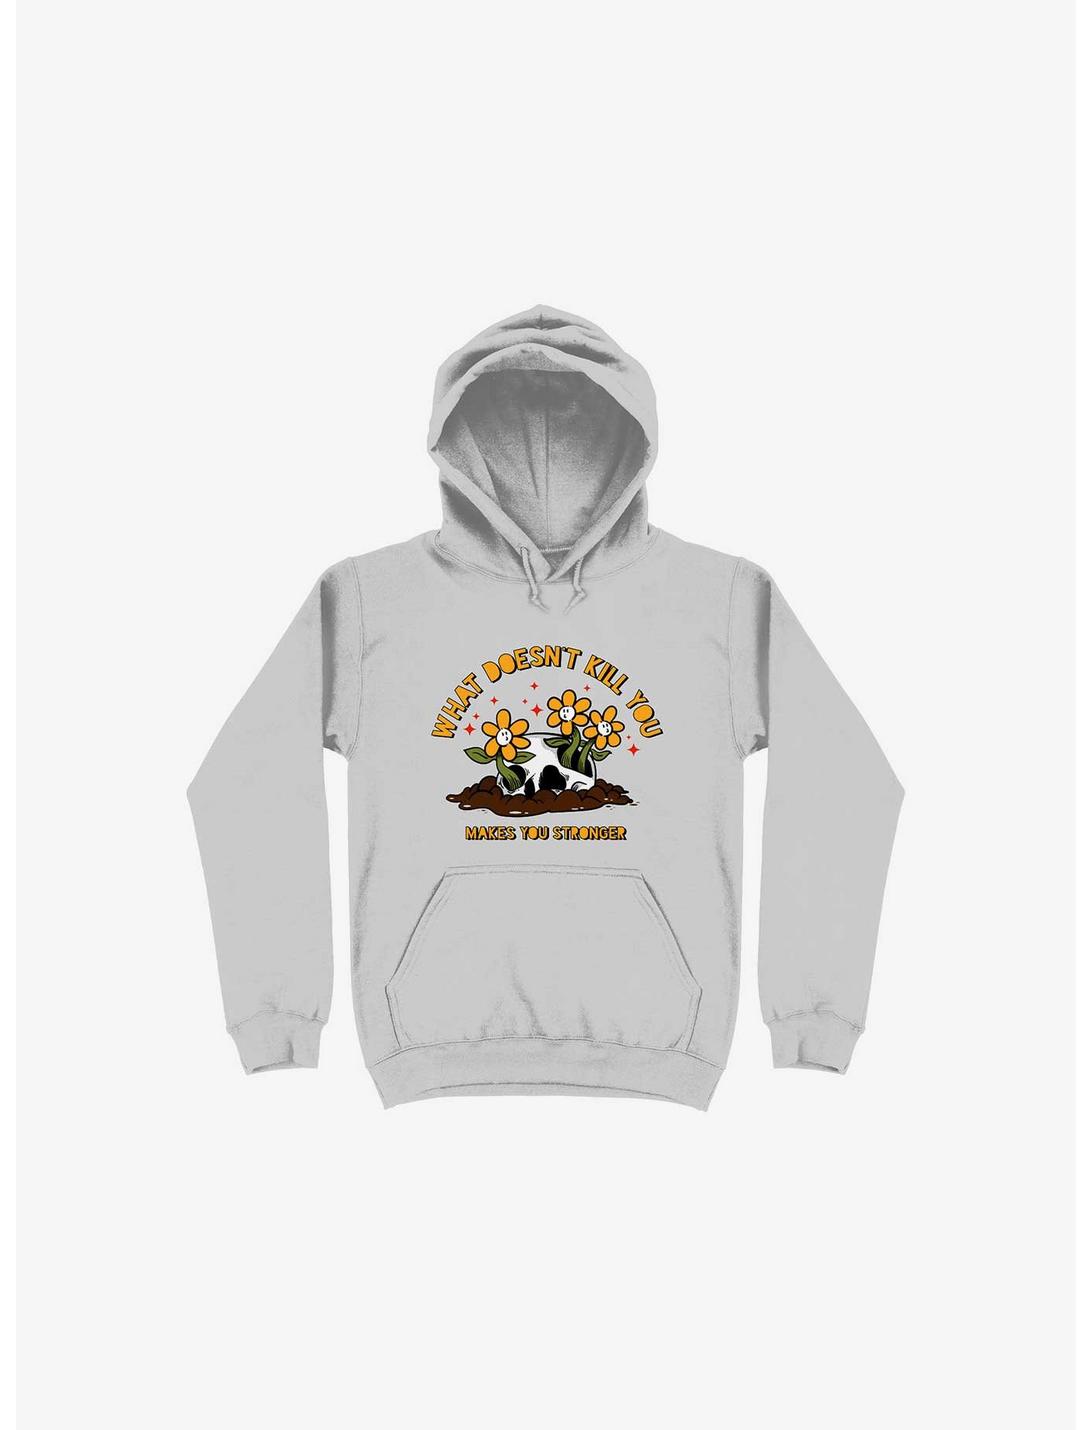 What Doesn't Kill You Makes You Stronger Hoodie, SILVER, hi-res